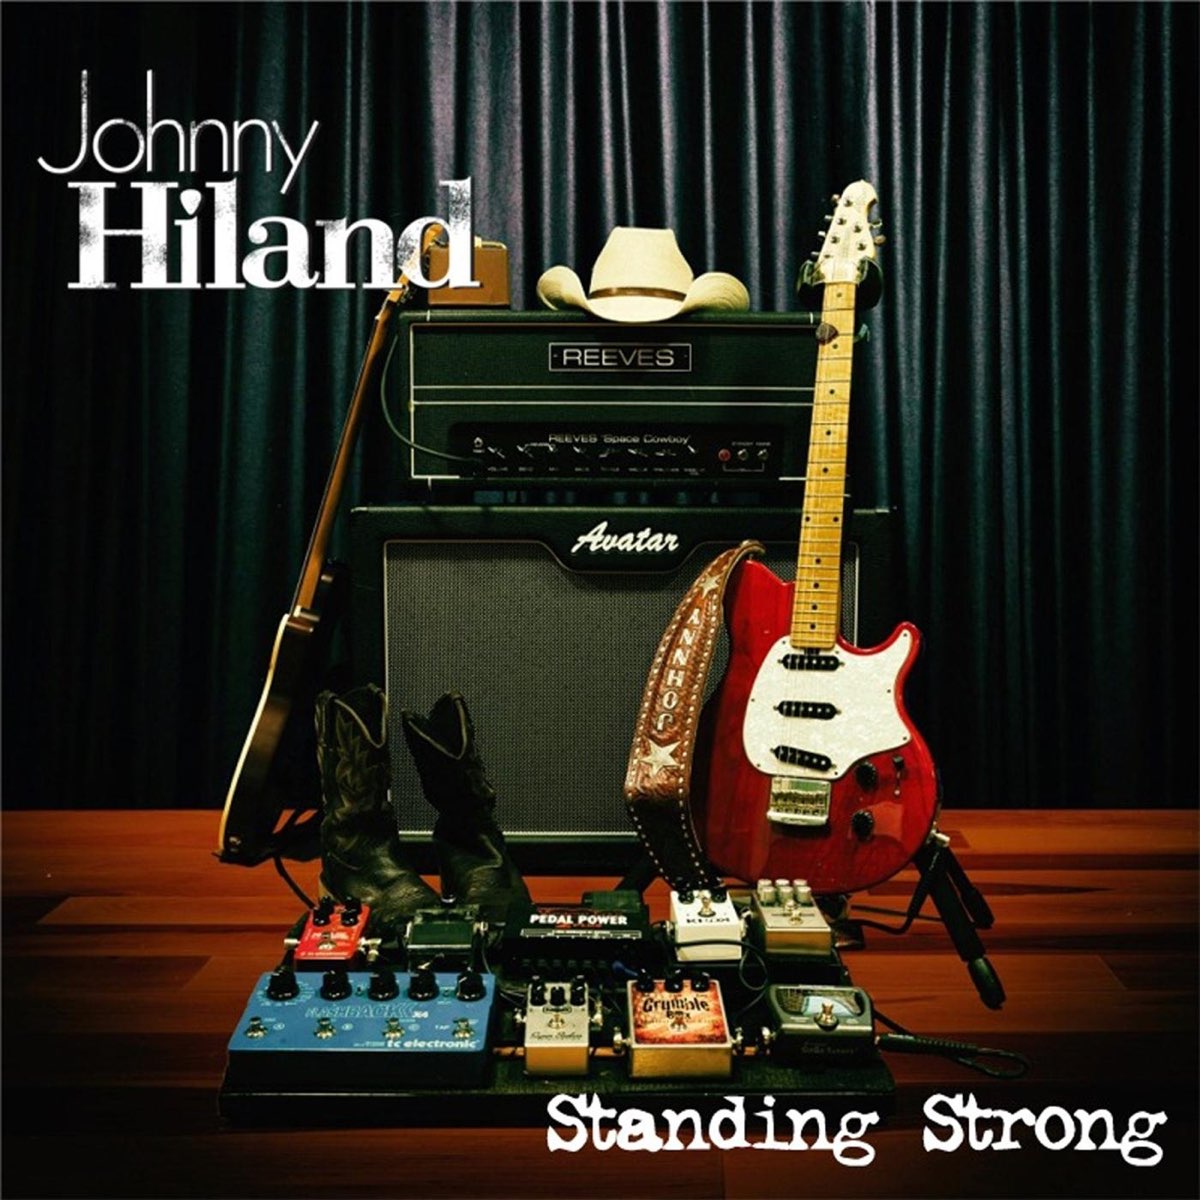 Johnny Hiland. Радио гитара. Stand strong